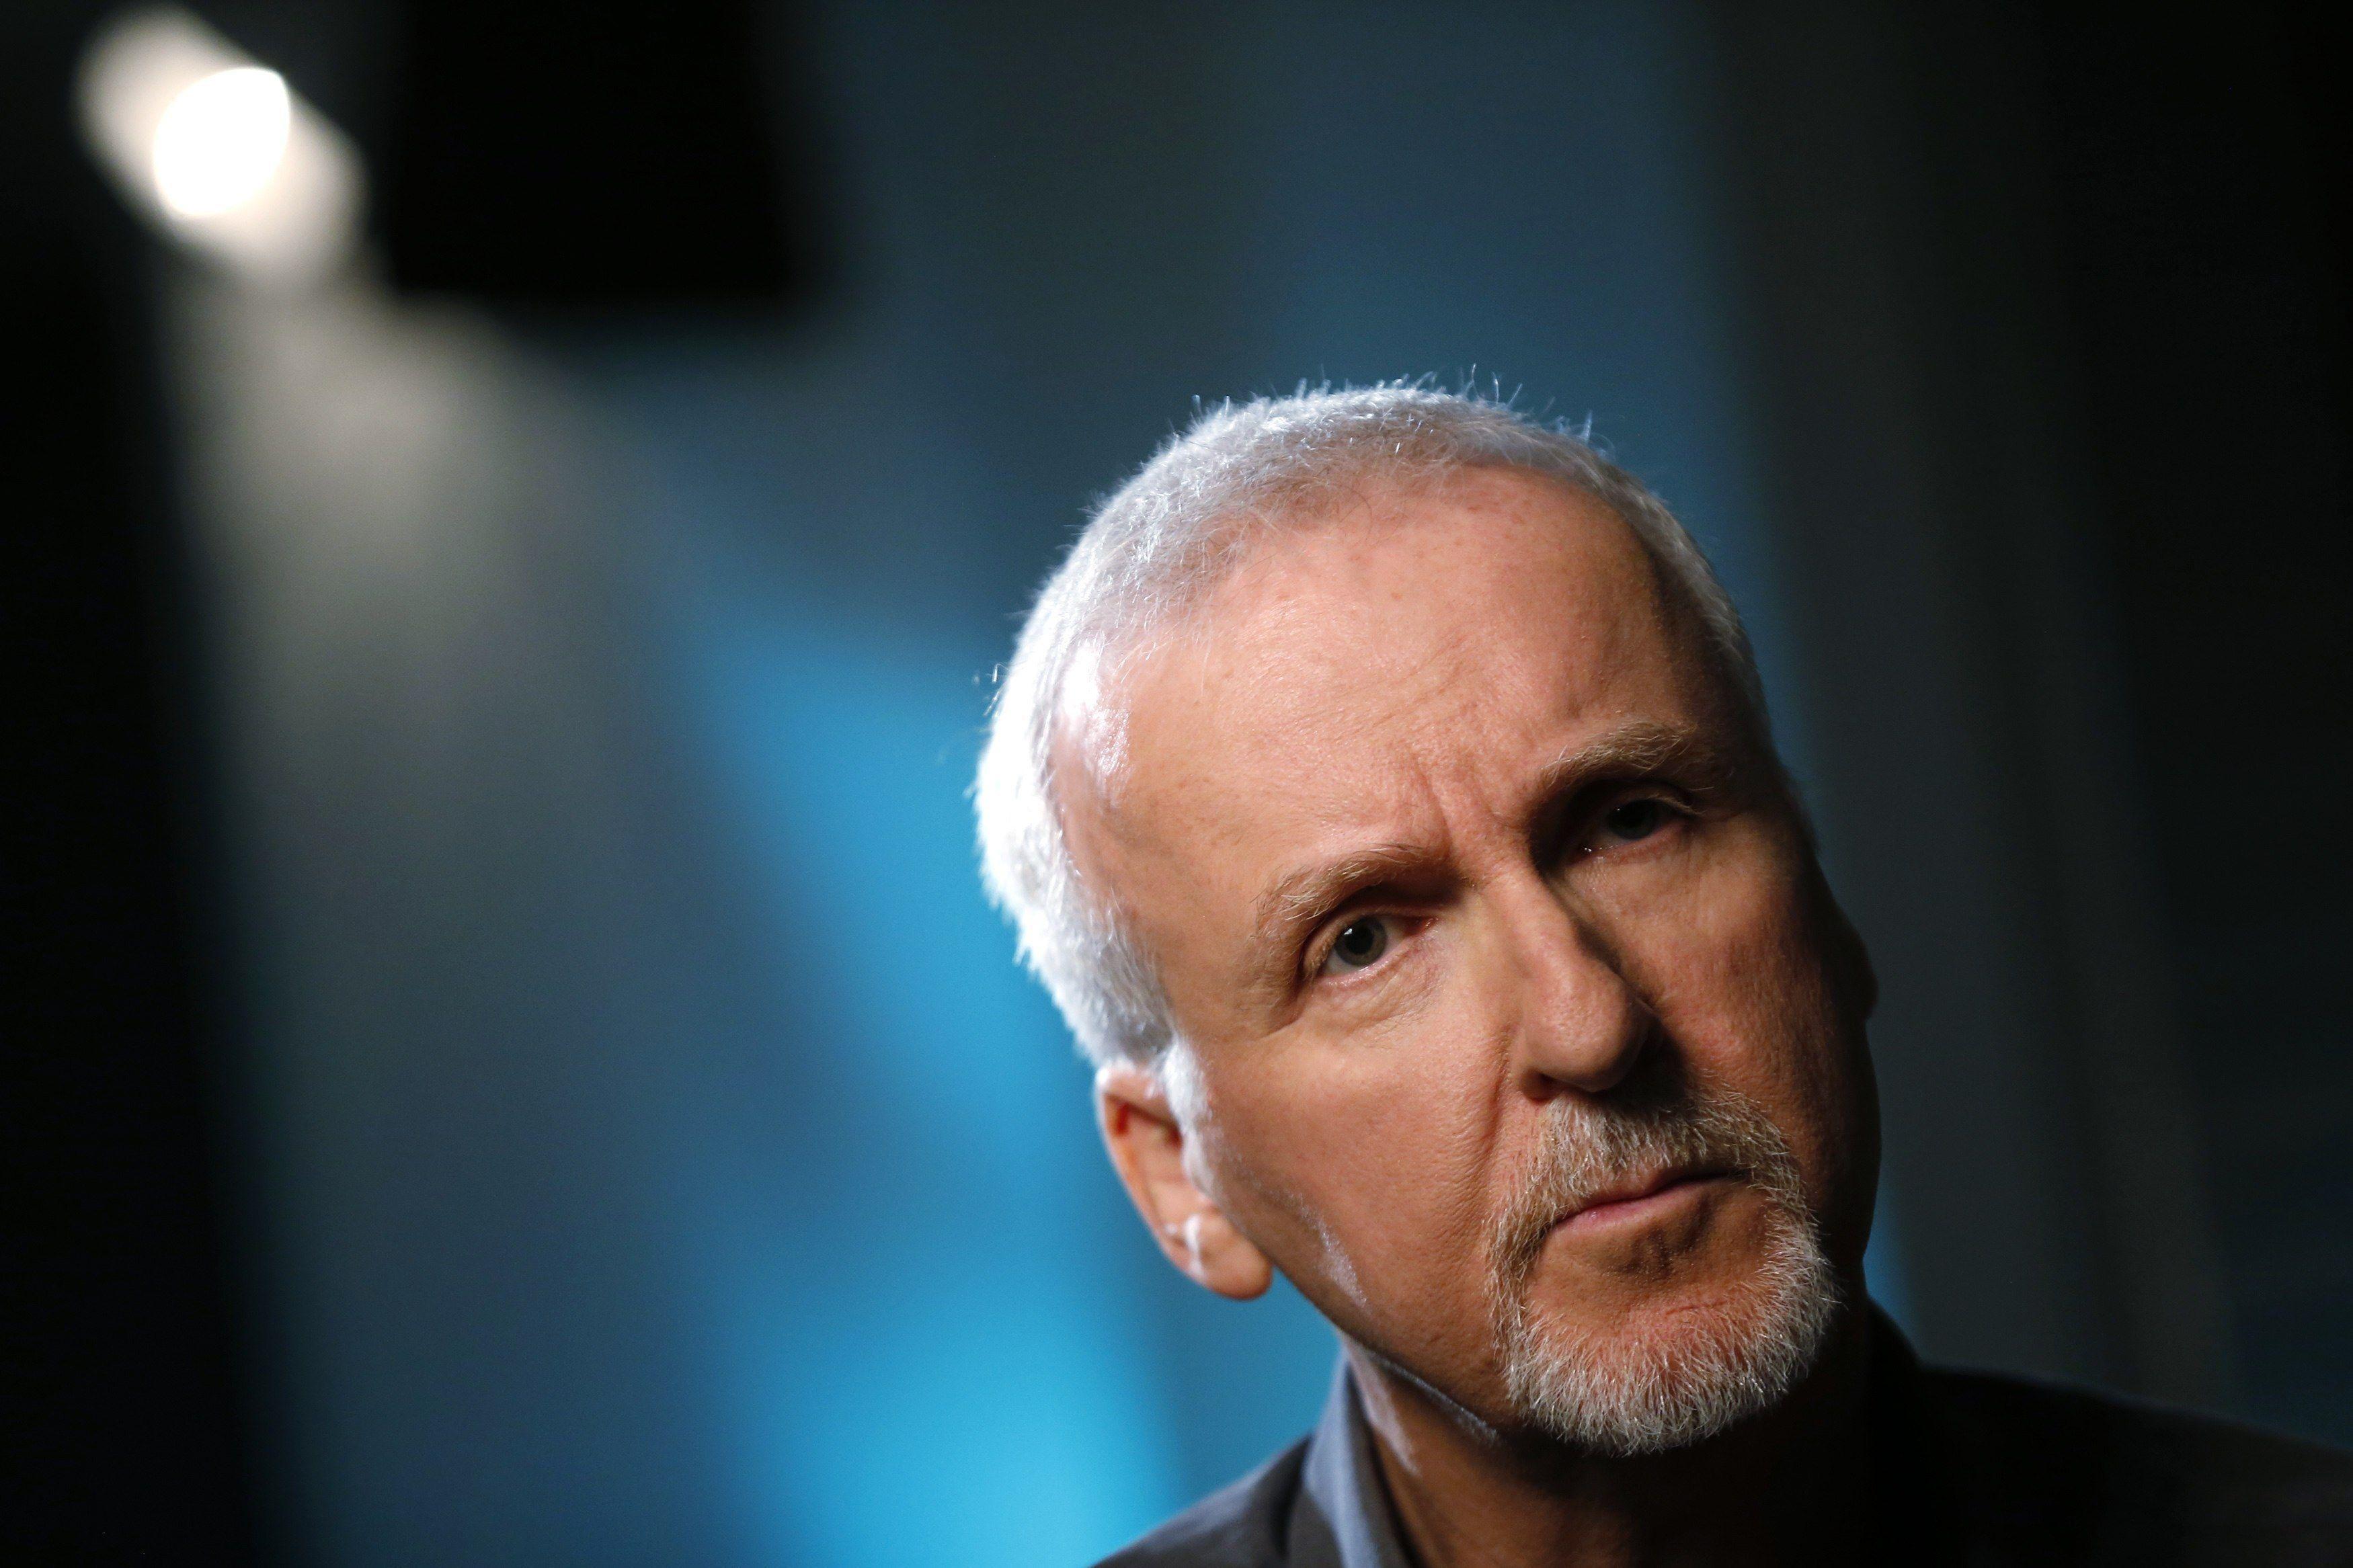 James Cameron Wallpaper Image Photo Picture Background